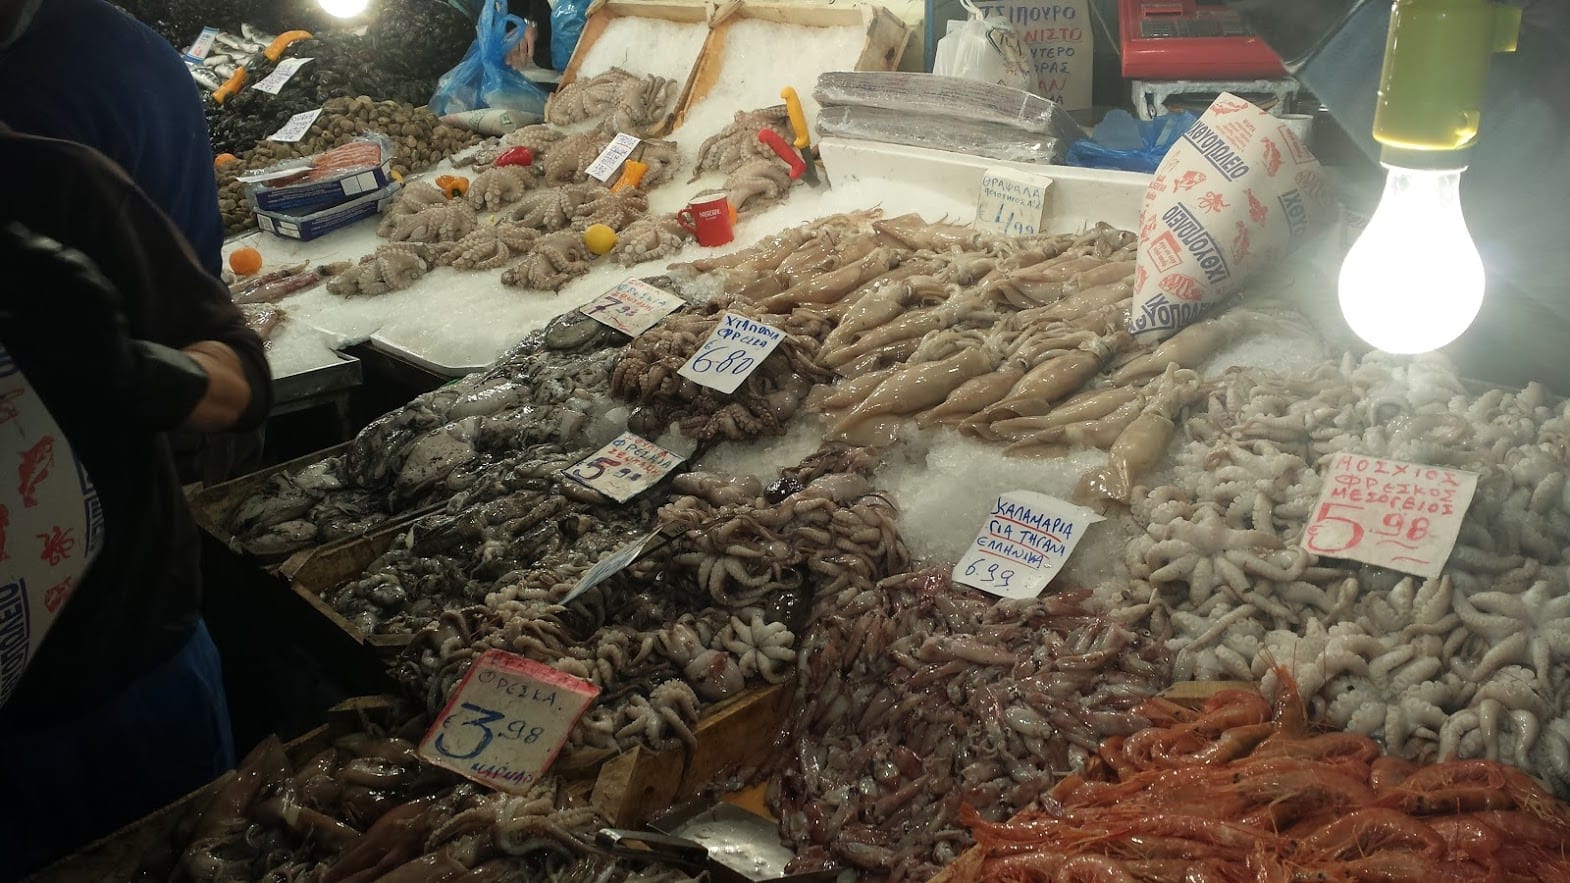 The central market in Athens has several fish sellers